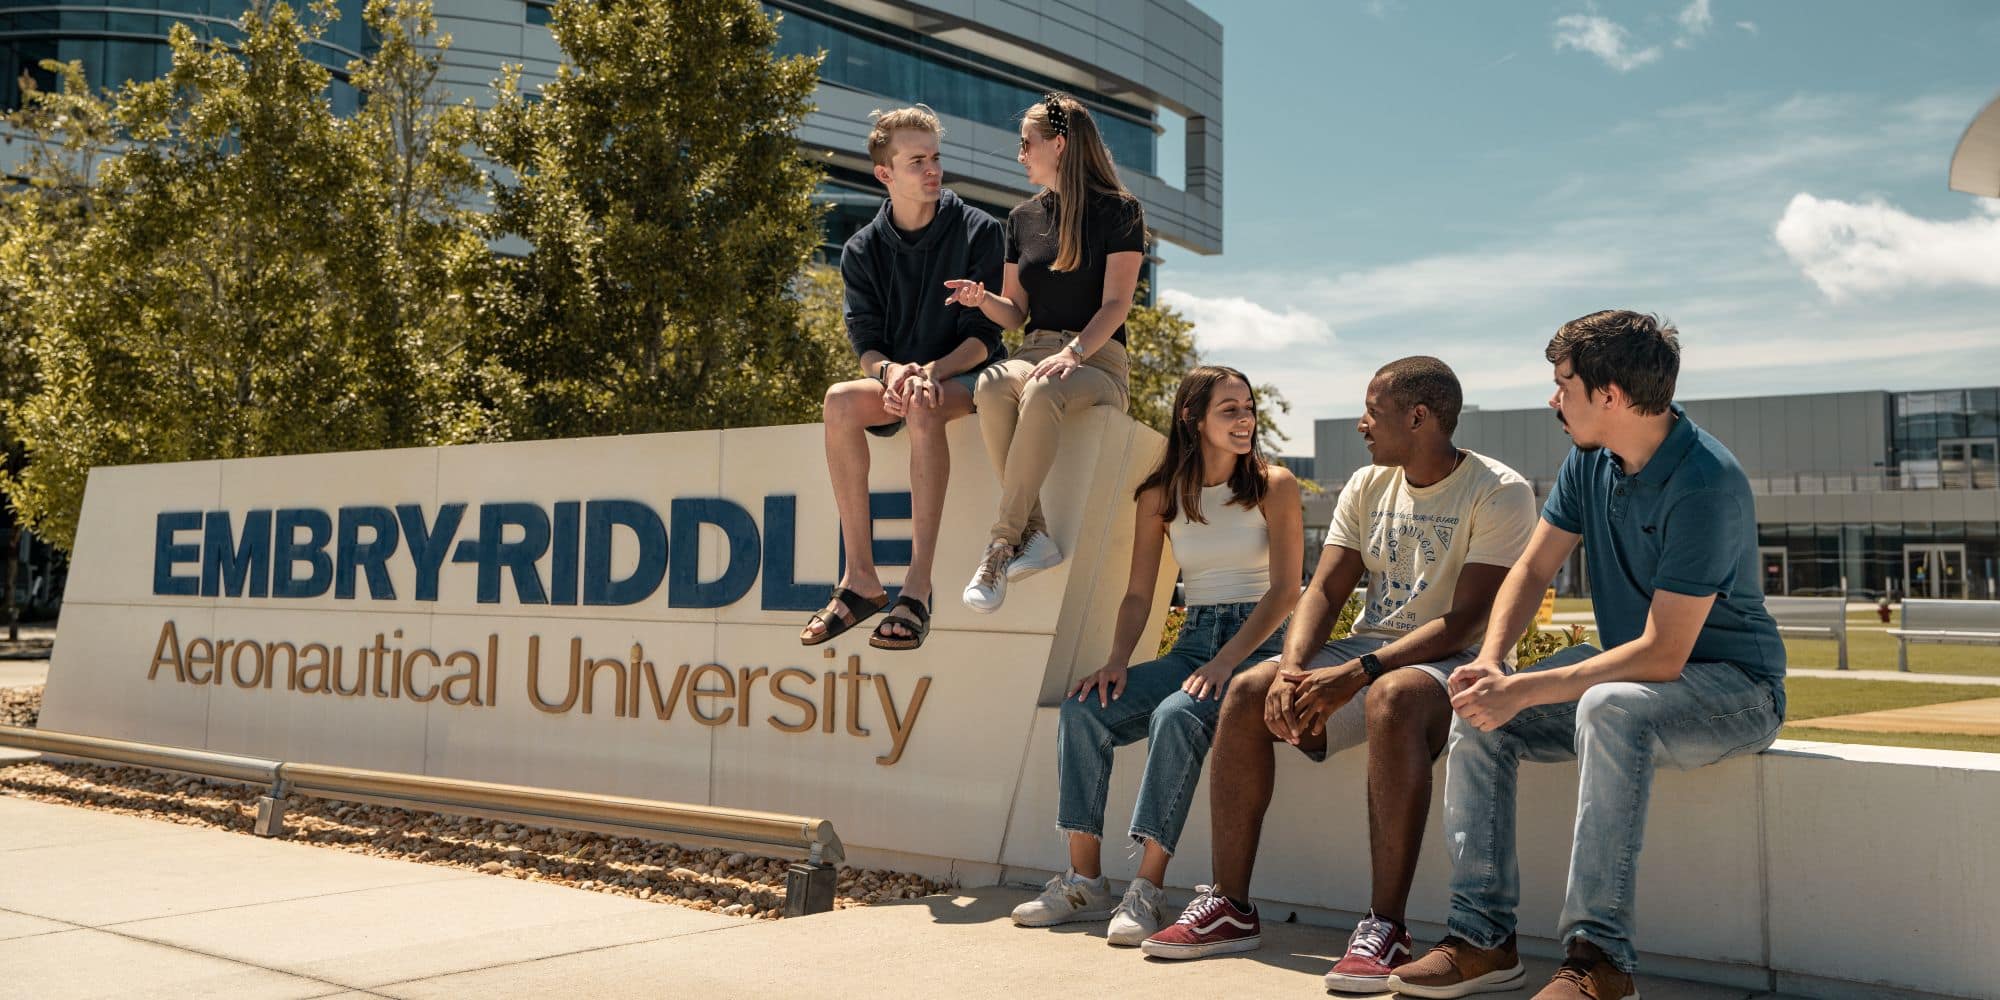 Embry-Riddle students hanging out on campus. (Photo: Embry-Riddle / Joseph Harrison)